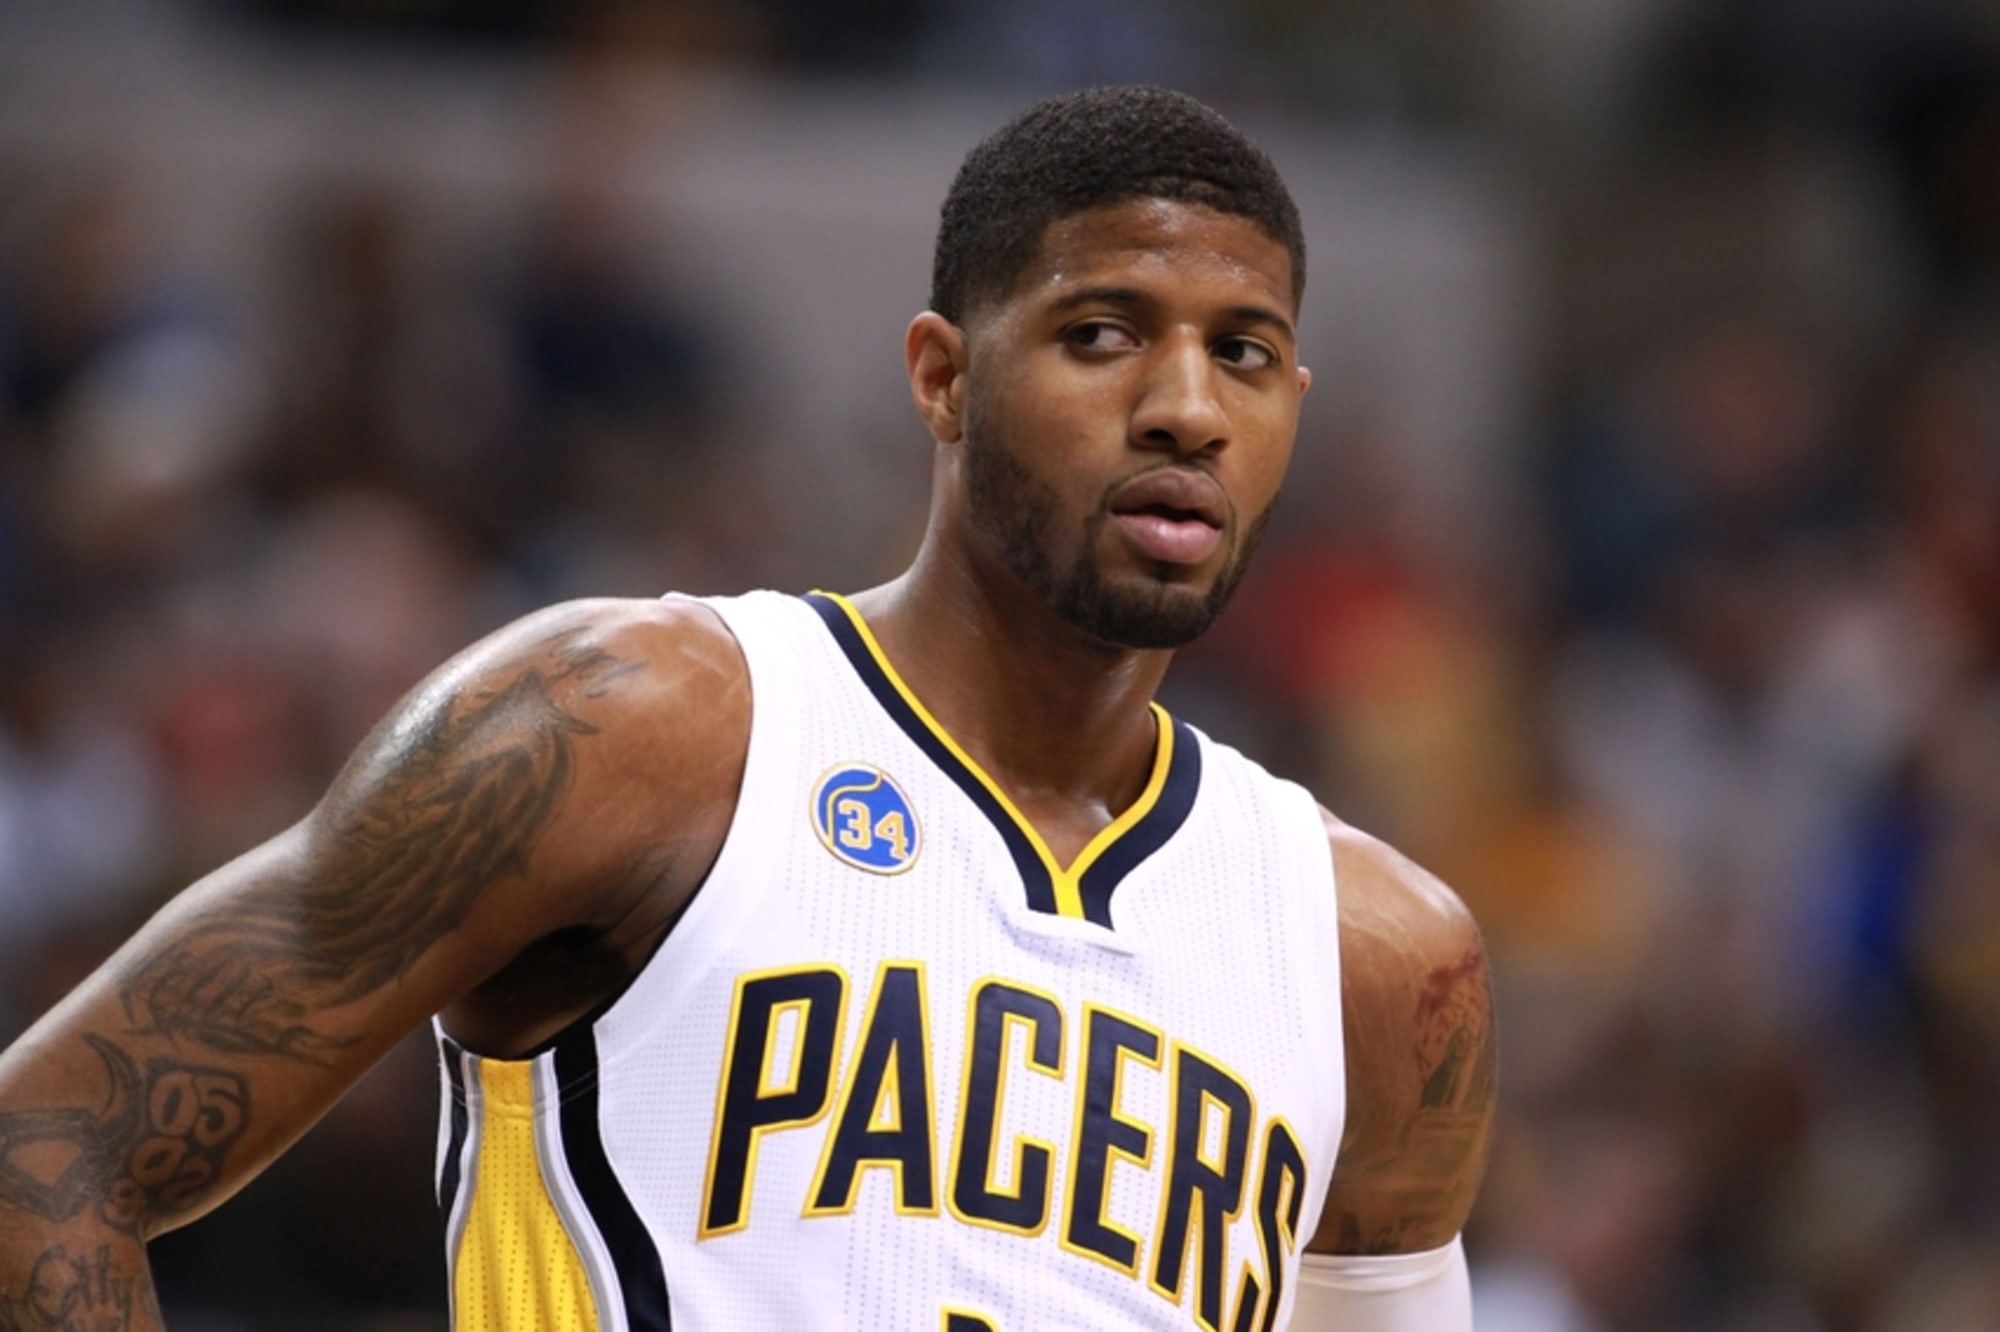 The Real-Life Diet of Paul George, Who Made the Comeback of the Year